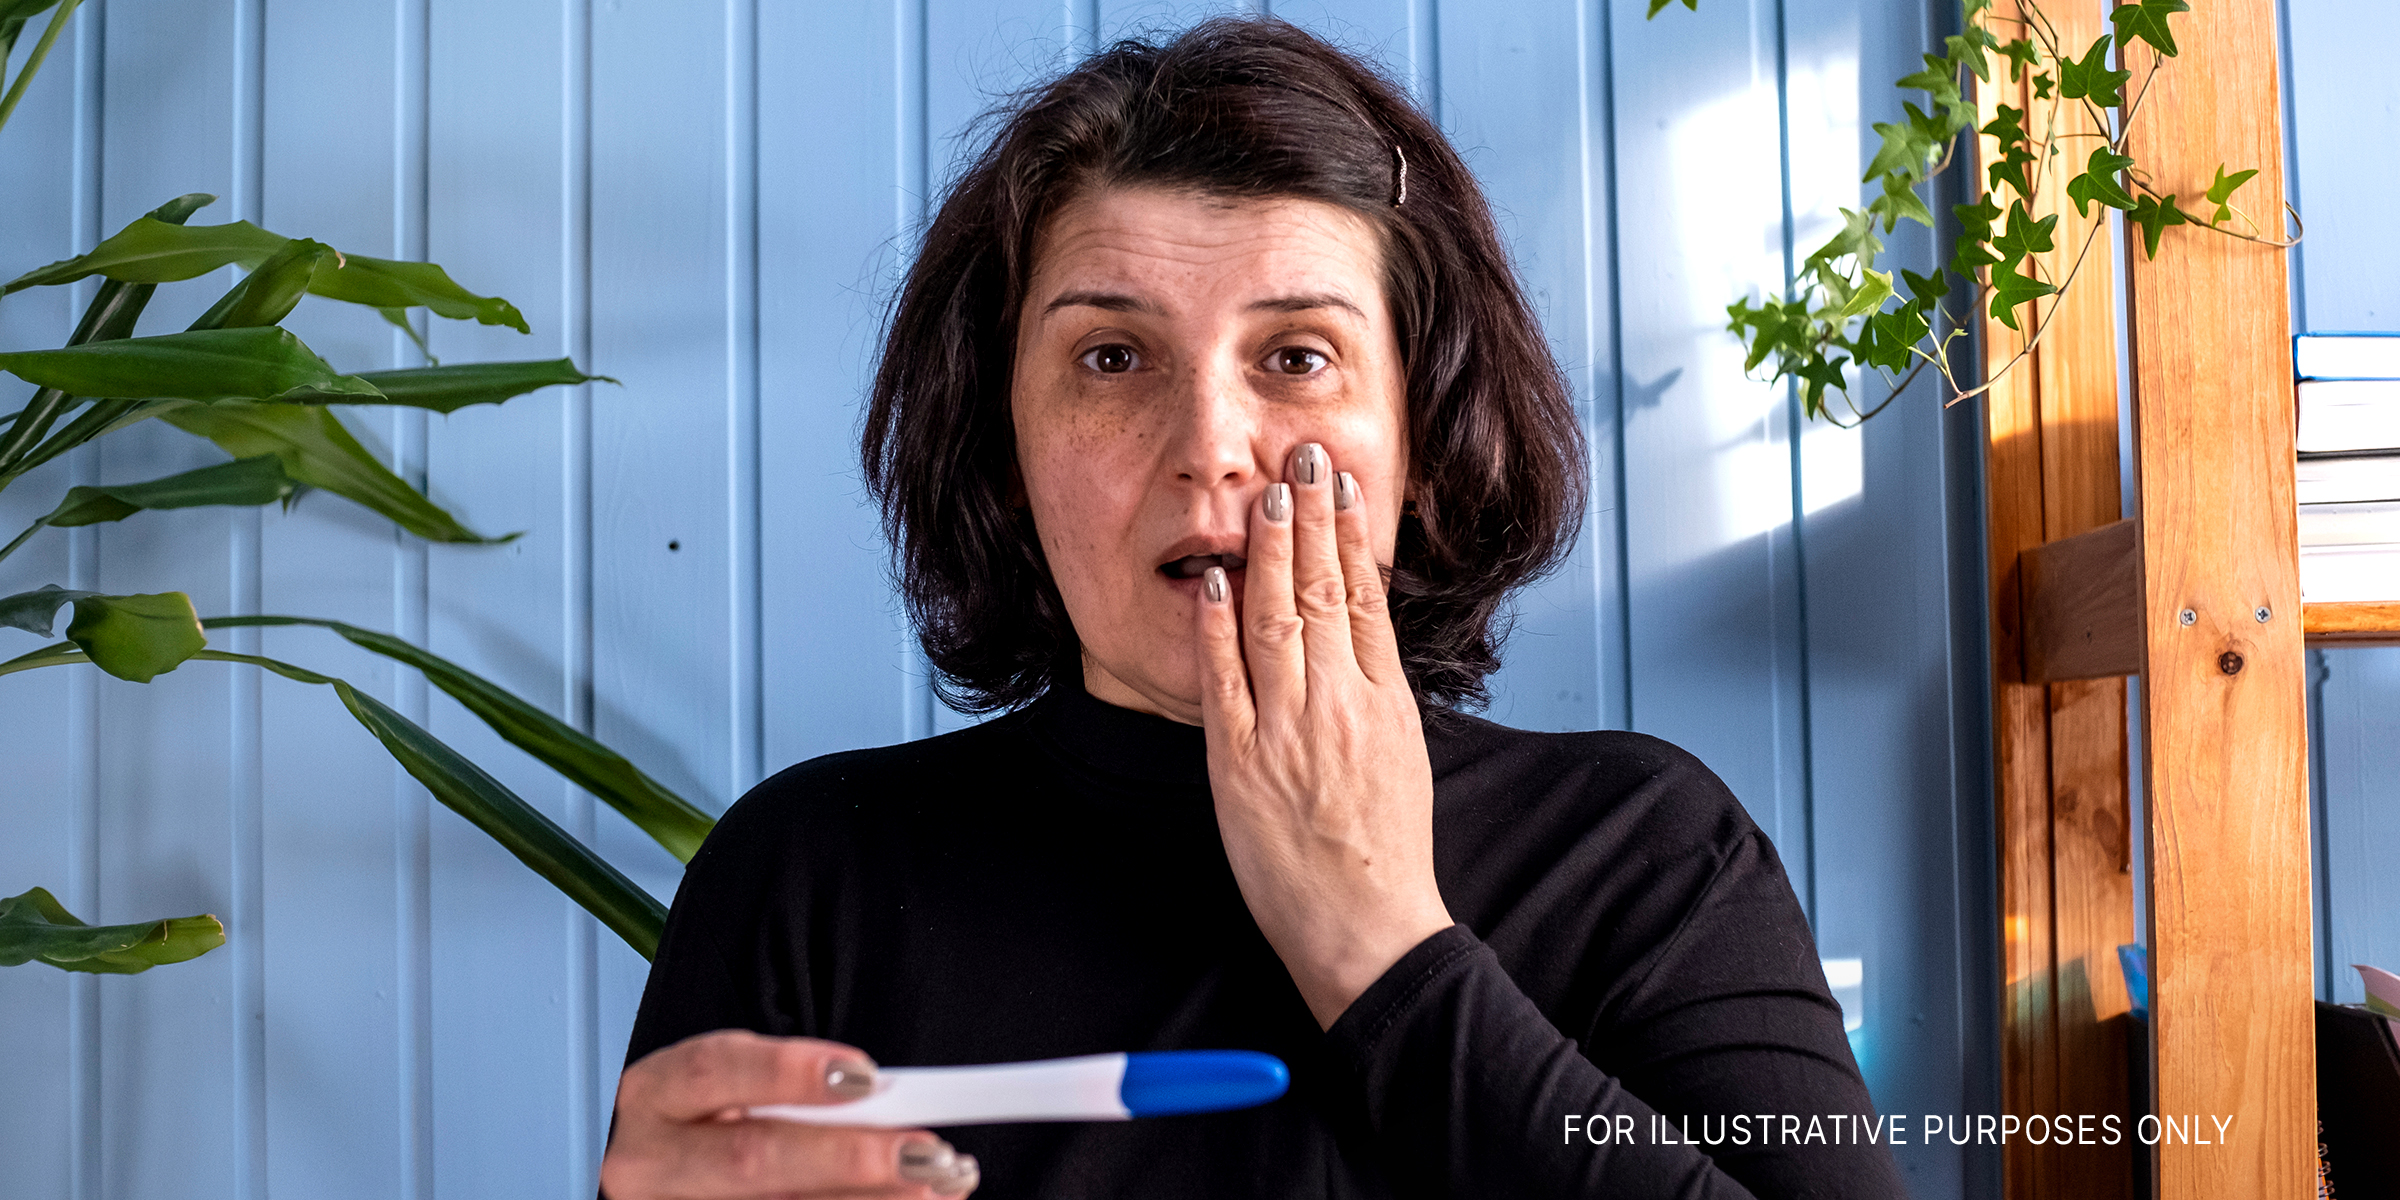 A middle-aged woman looking at a pregnancy test result showing positive | Source: Shutterstock